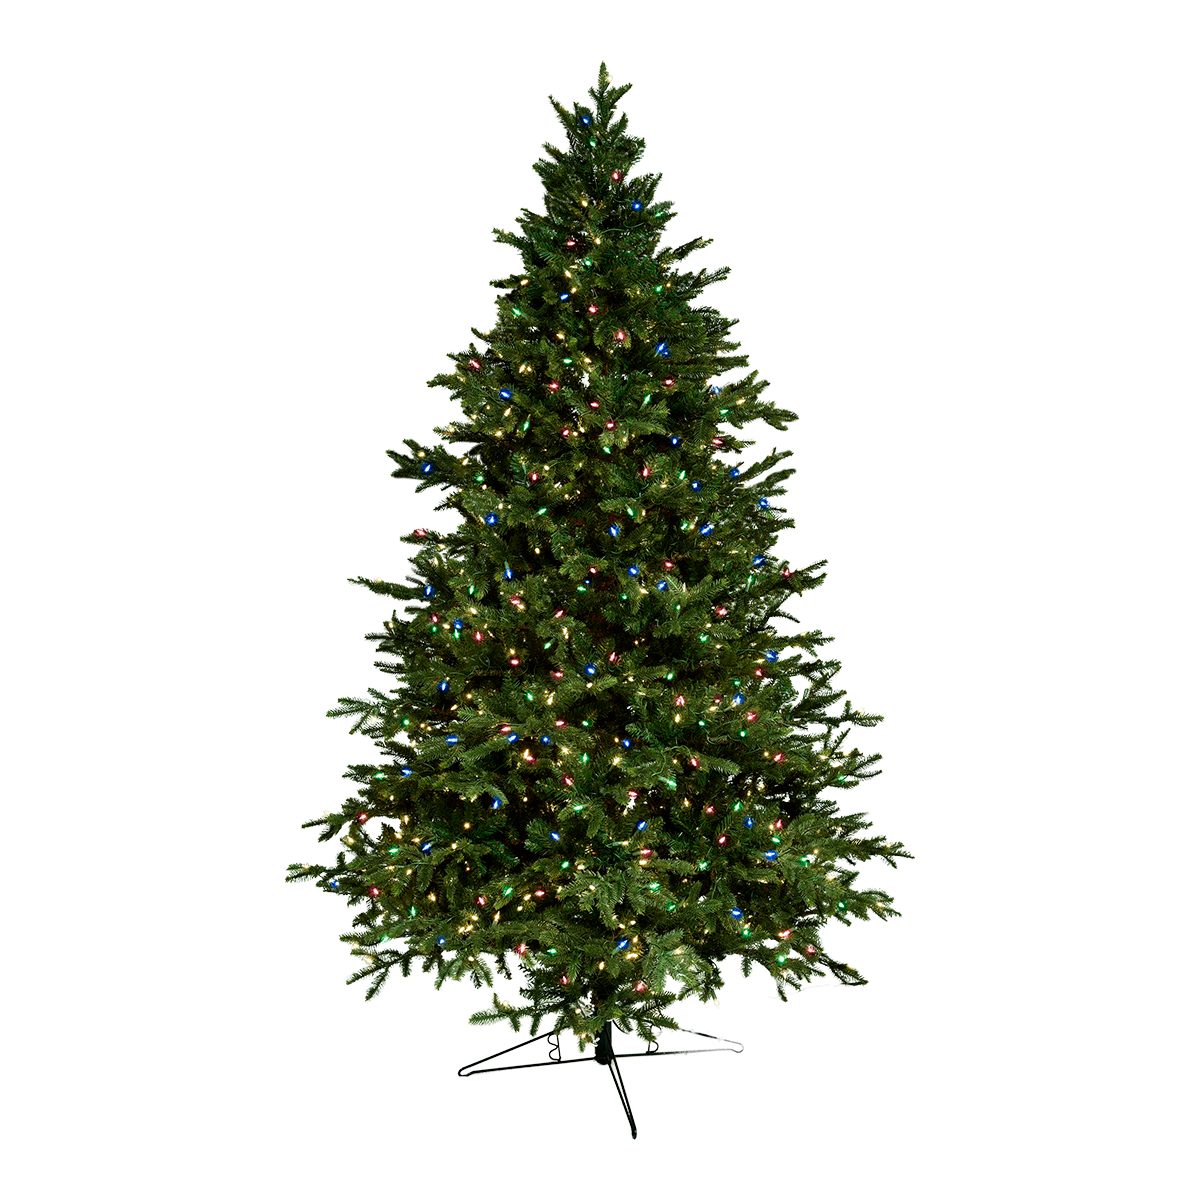 Alaskan Deluxe Christmas Tree - Multi-Incandescent Lights - One-Plug Power Supply - 7.5ft Tall